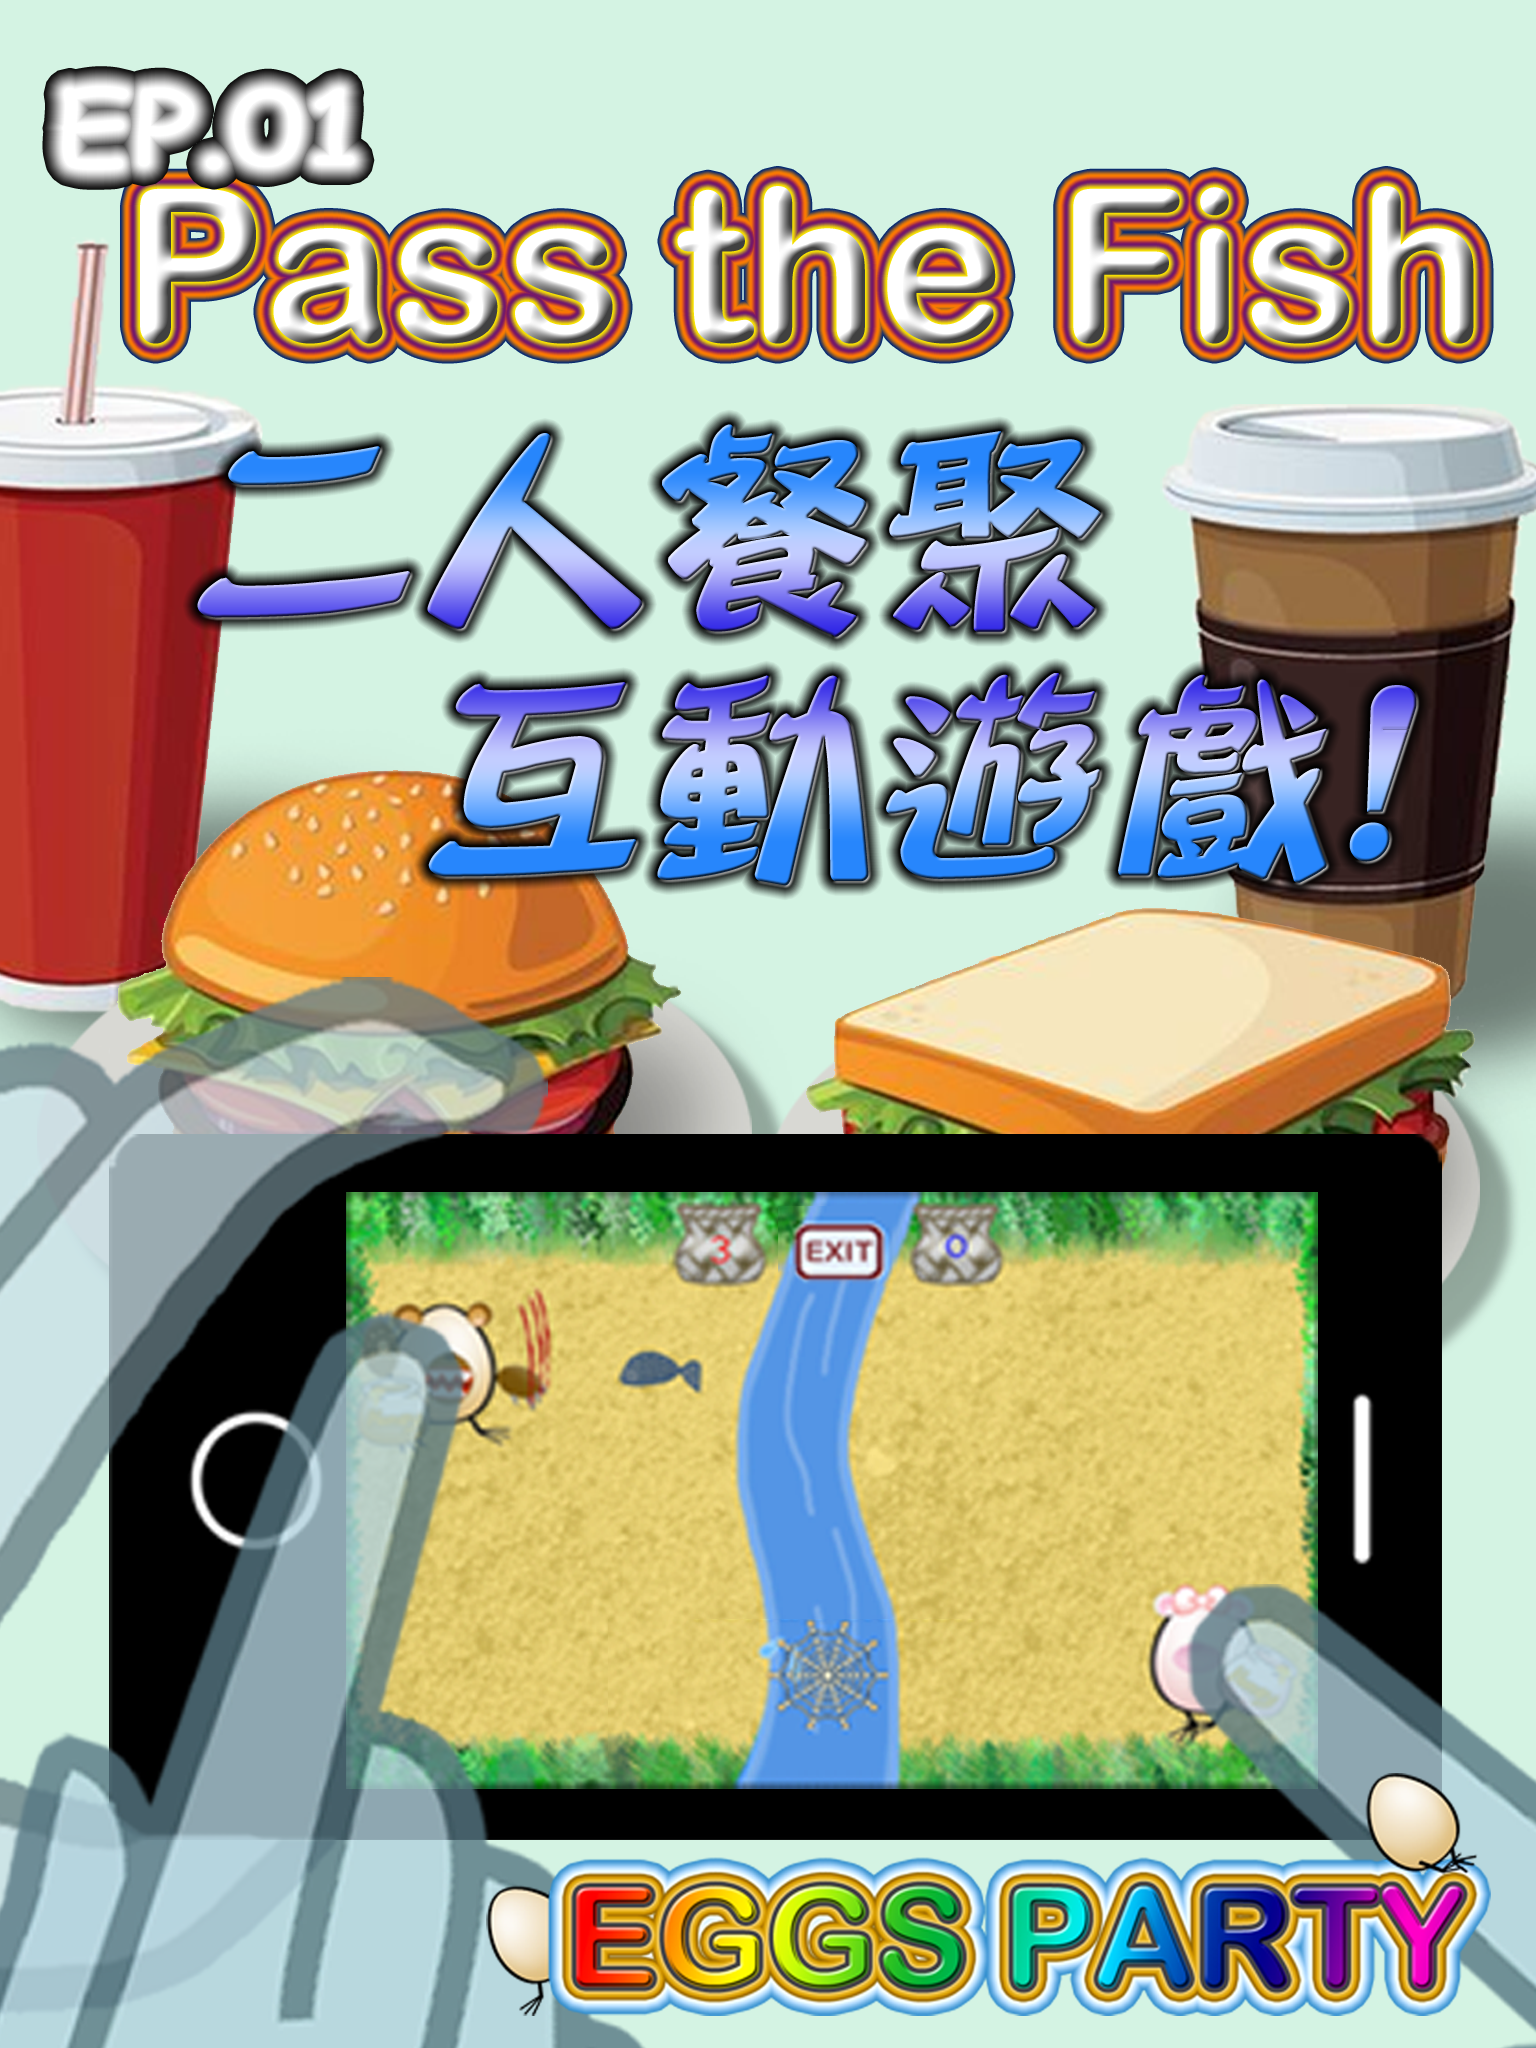 Screenshot 1 of Eggs Party ep1：Pass The Fish 2.1